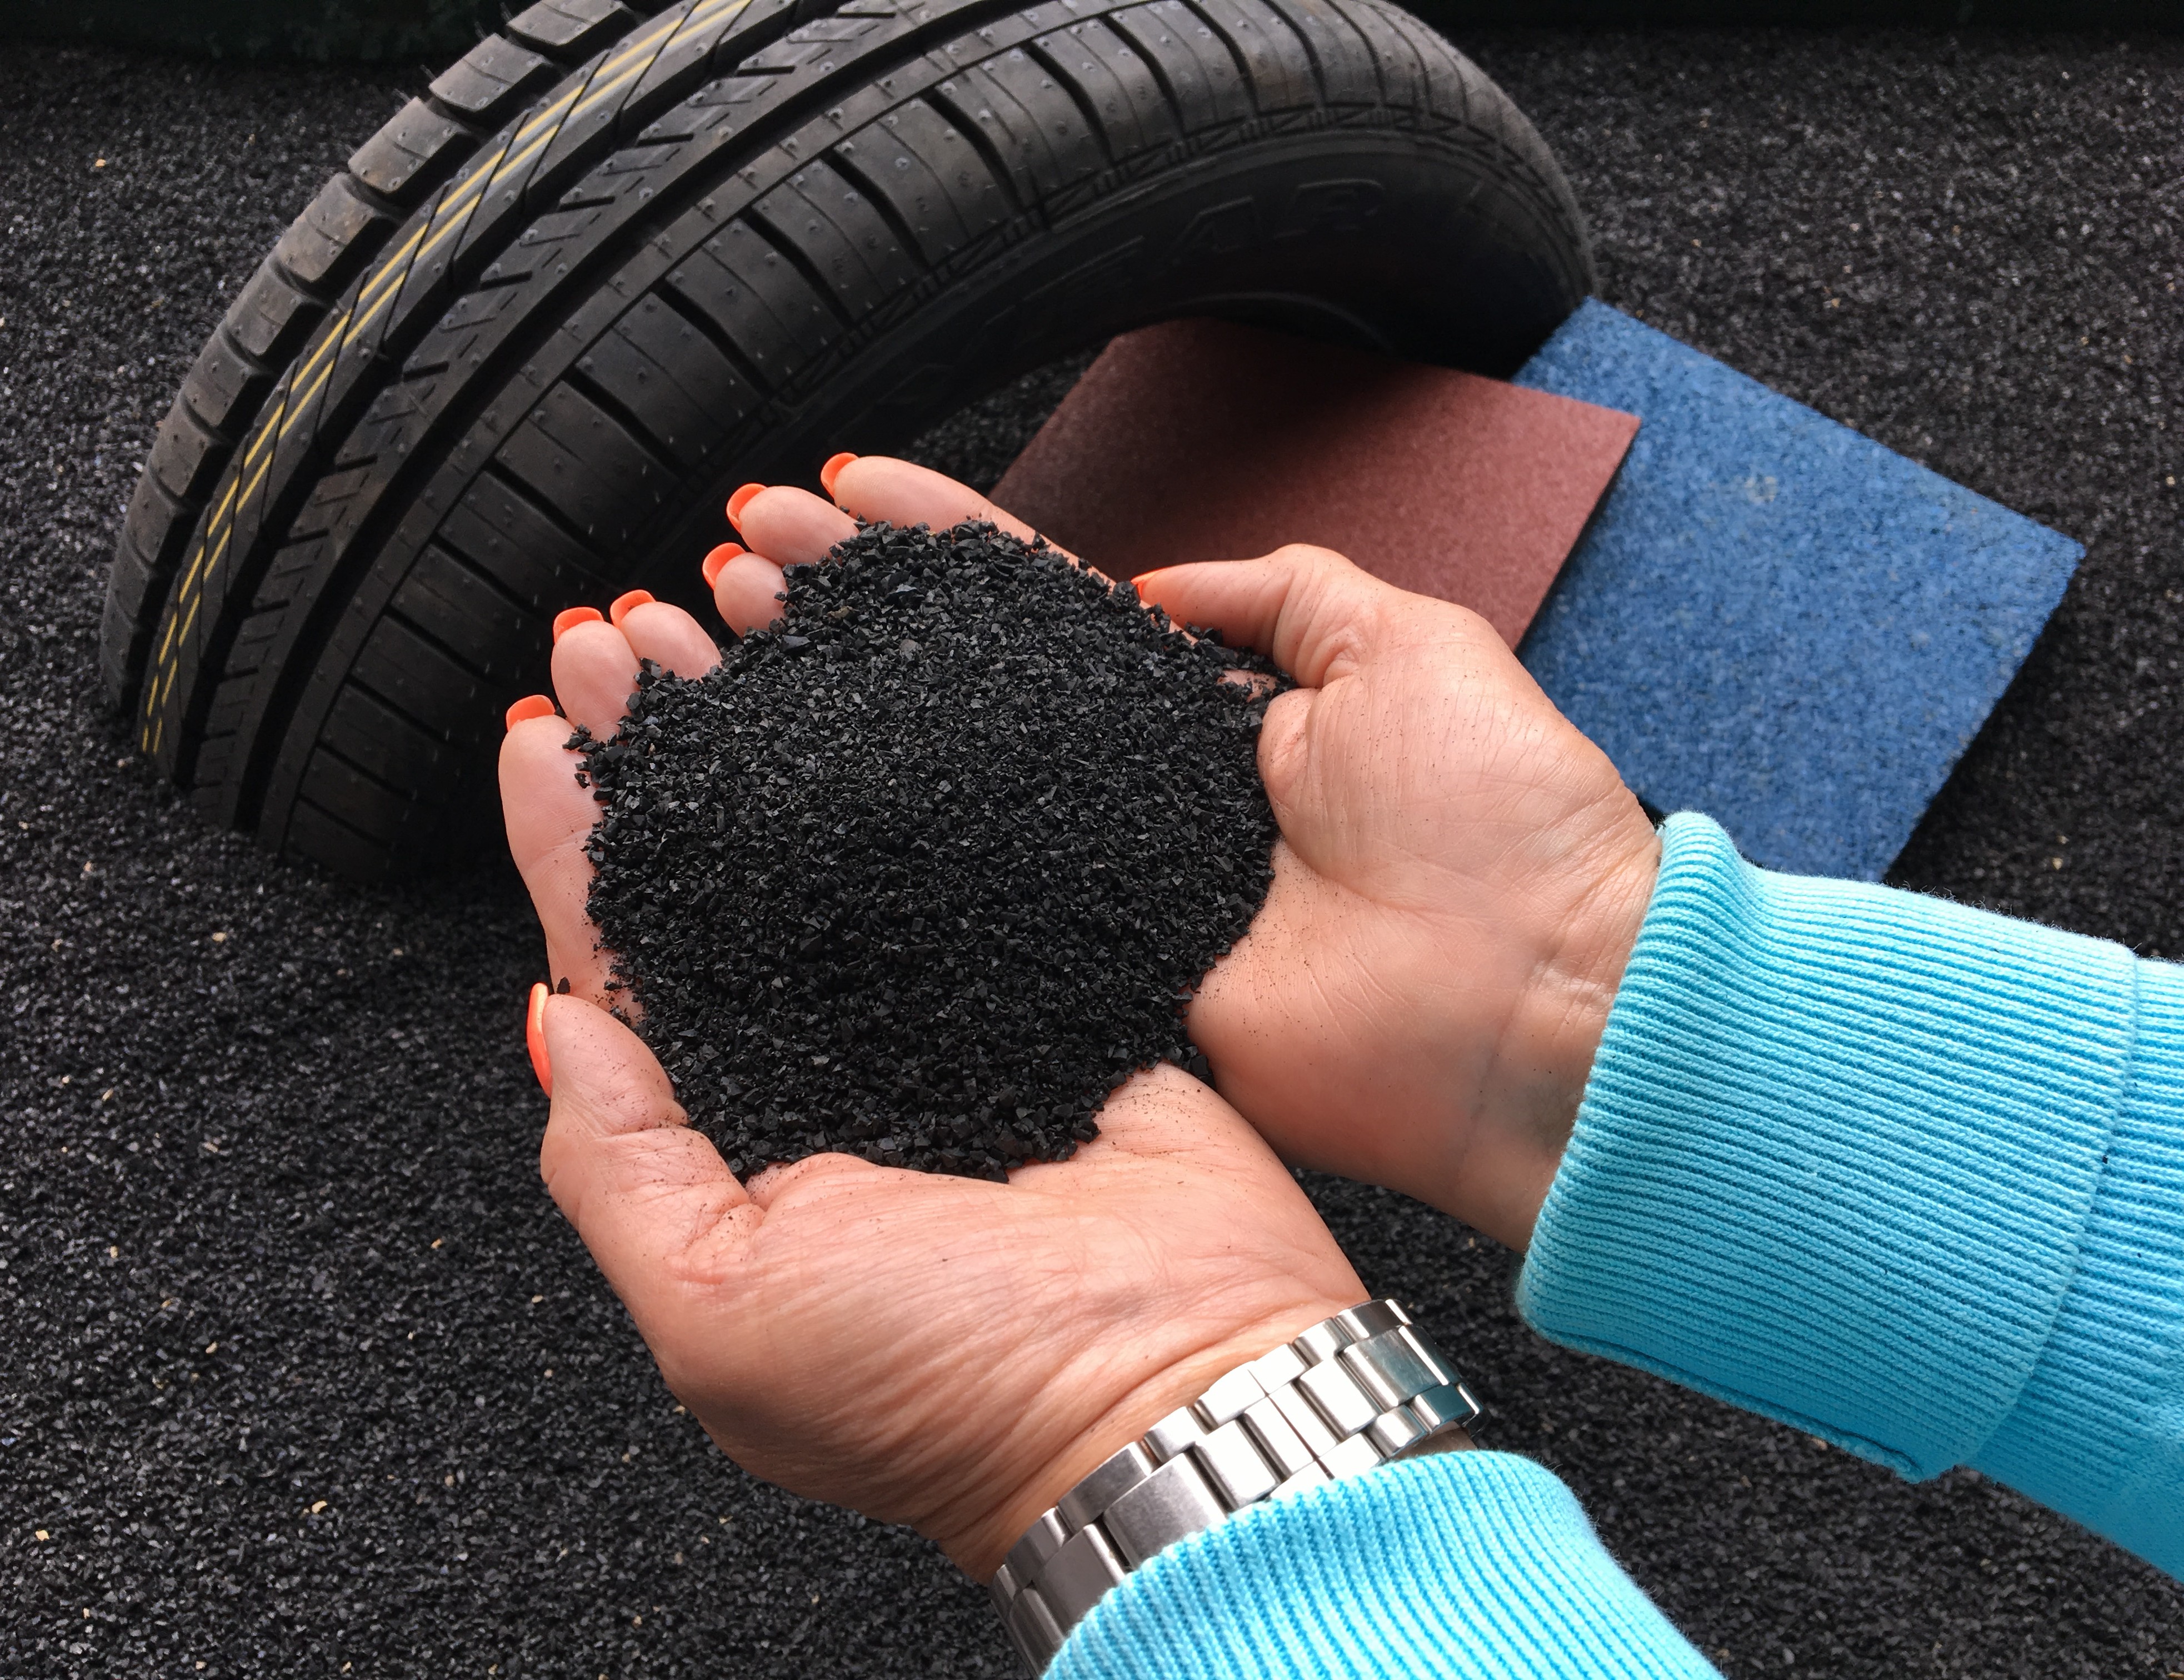 Granutec and Trisol crush the tyres and create various products mechanically instead of burning them to avoid releasing CO2 into the atmosphere - Credits: Andrés Garcia, Trisol